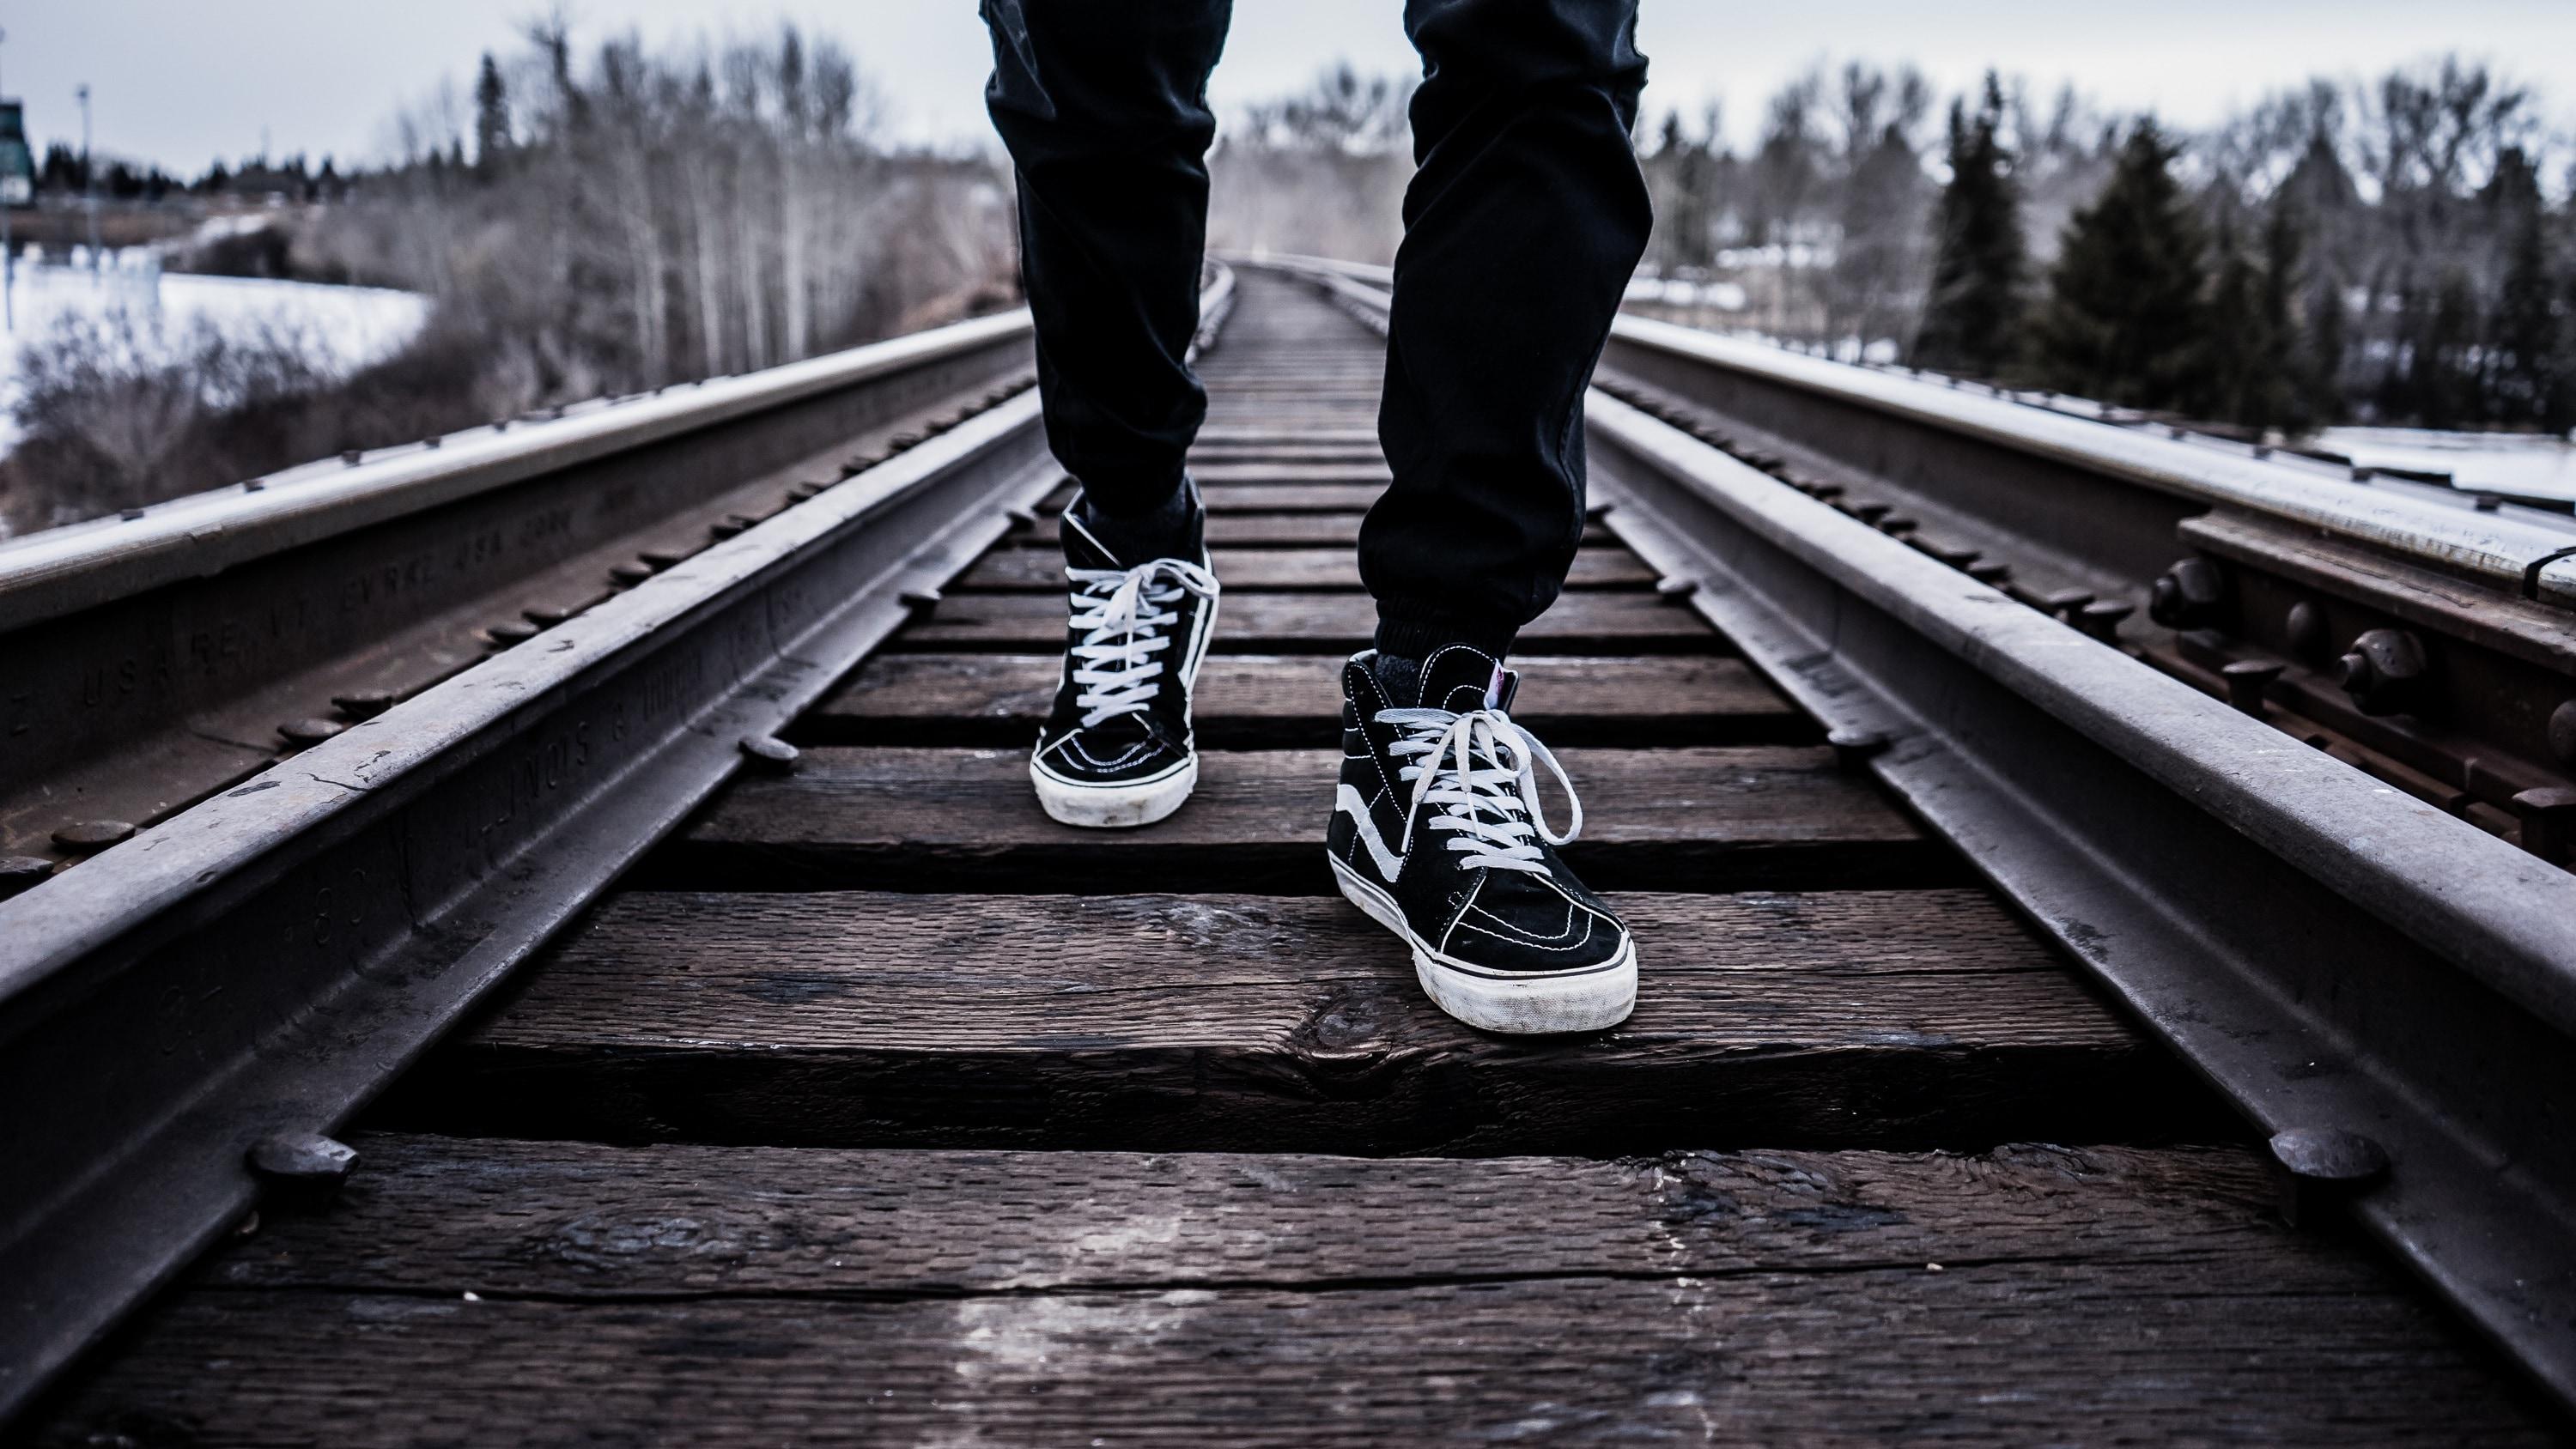 A person wearing black pants and black and white sneakers is walking on the train tracks. - Vans